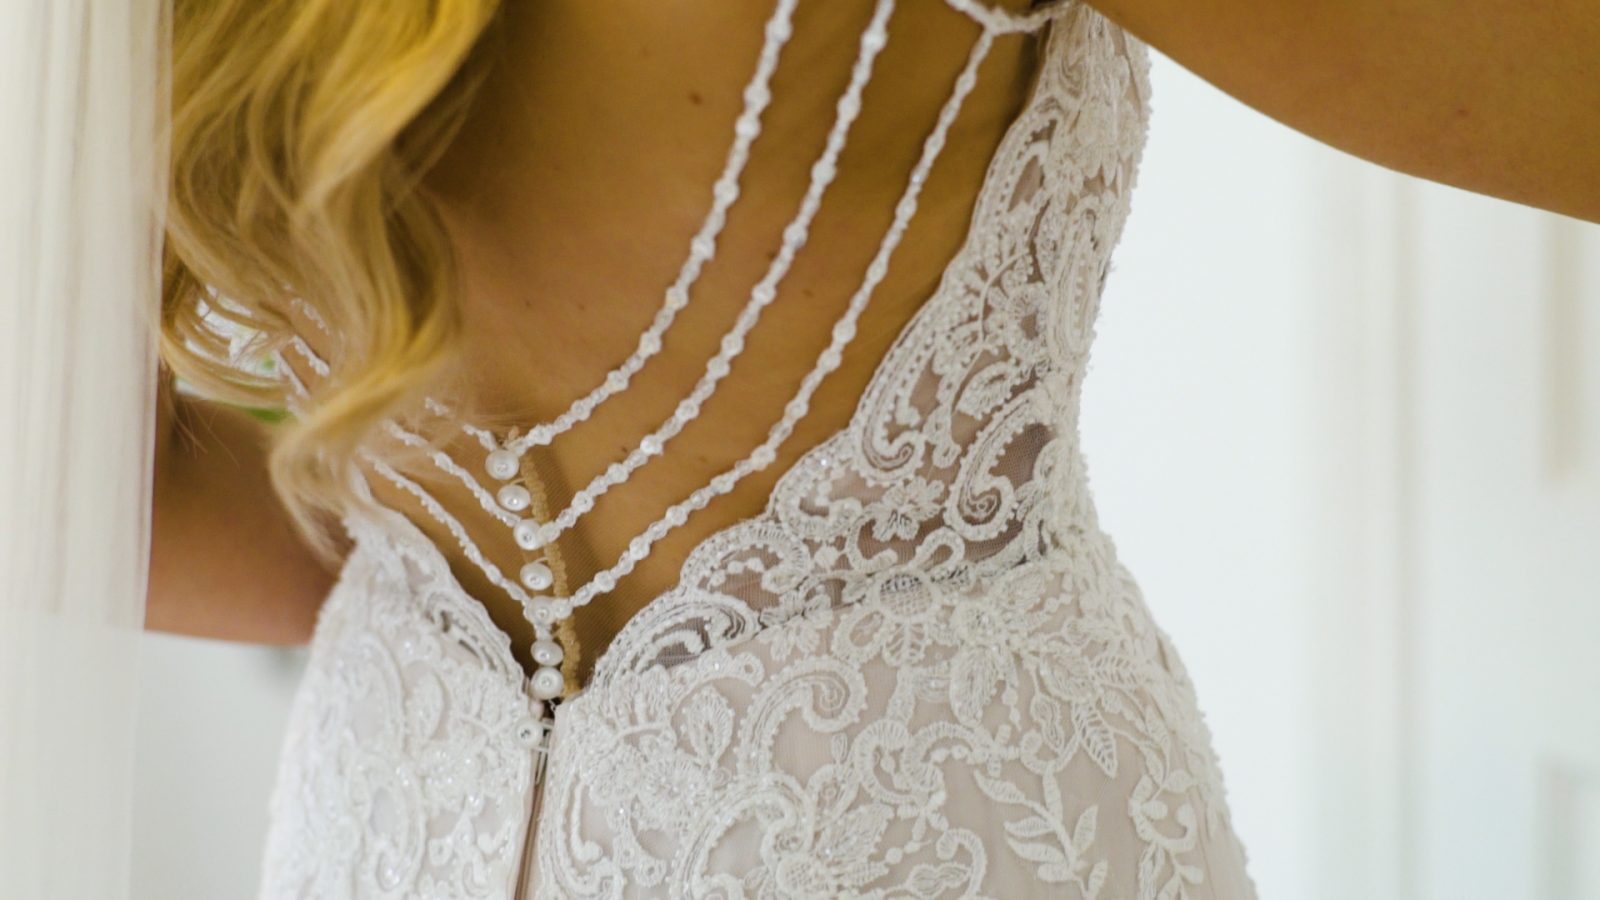 Detailing on the back of a wedding dress worn by a bride